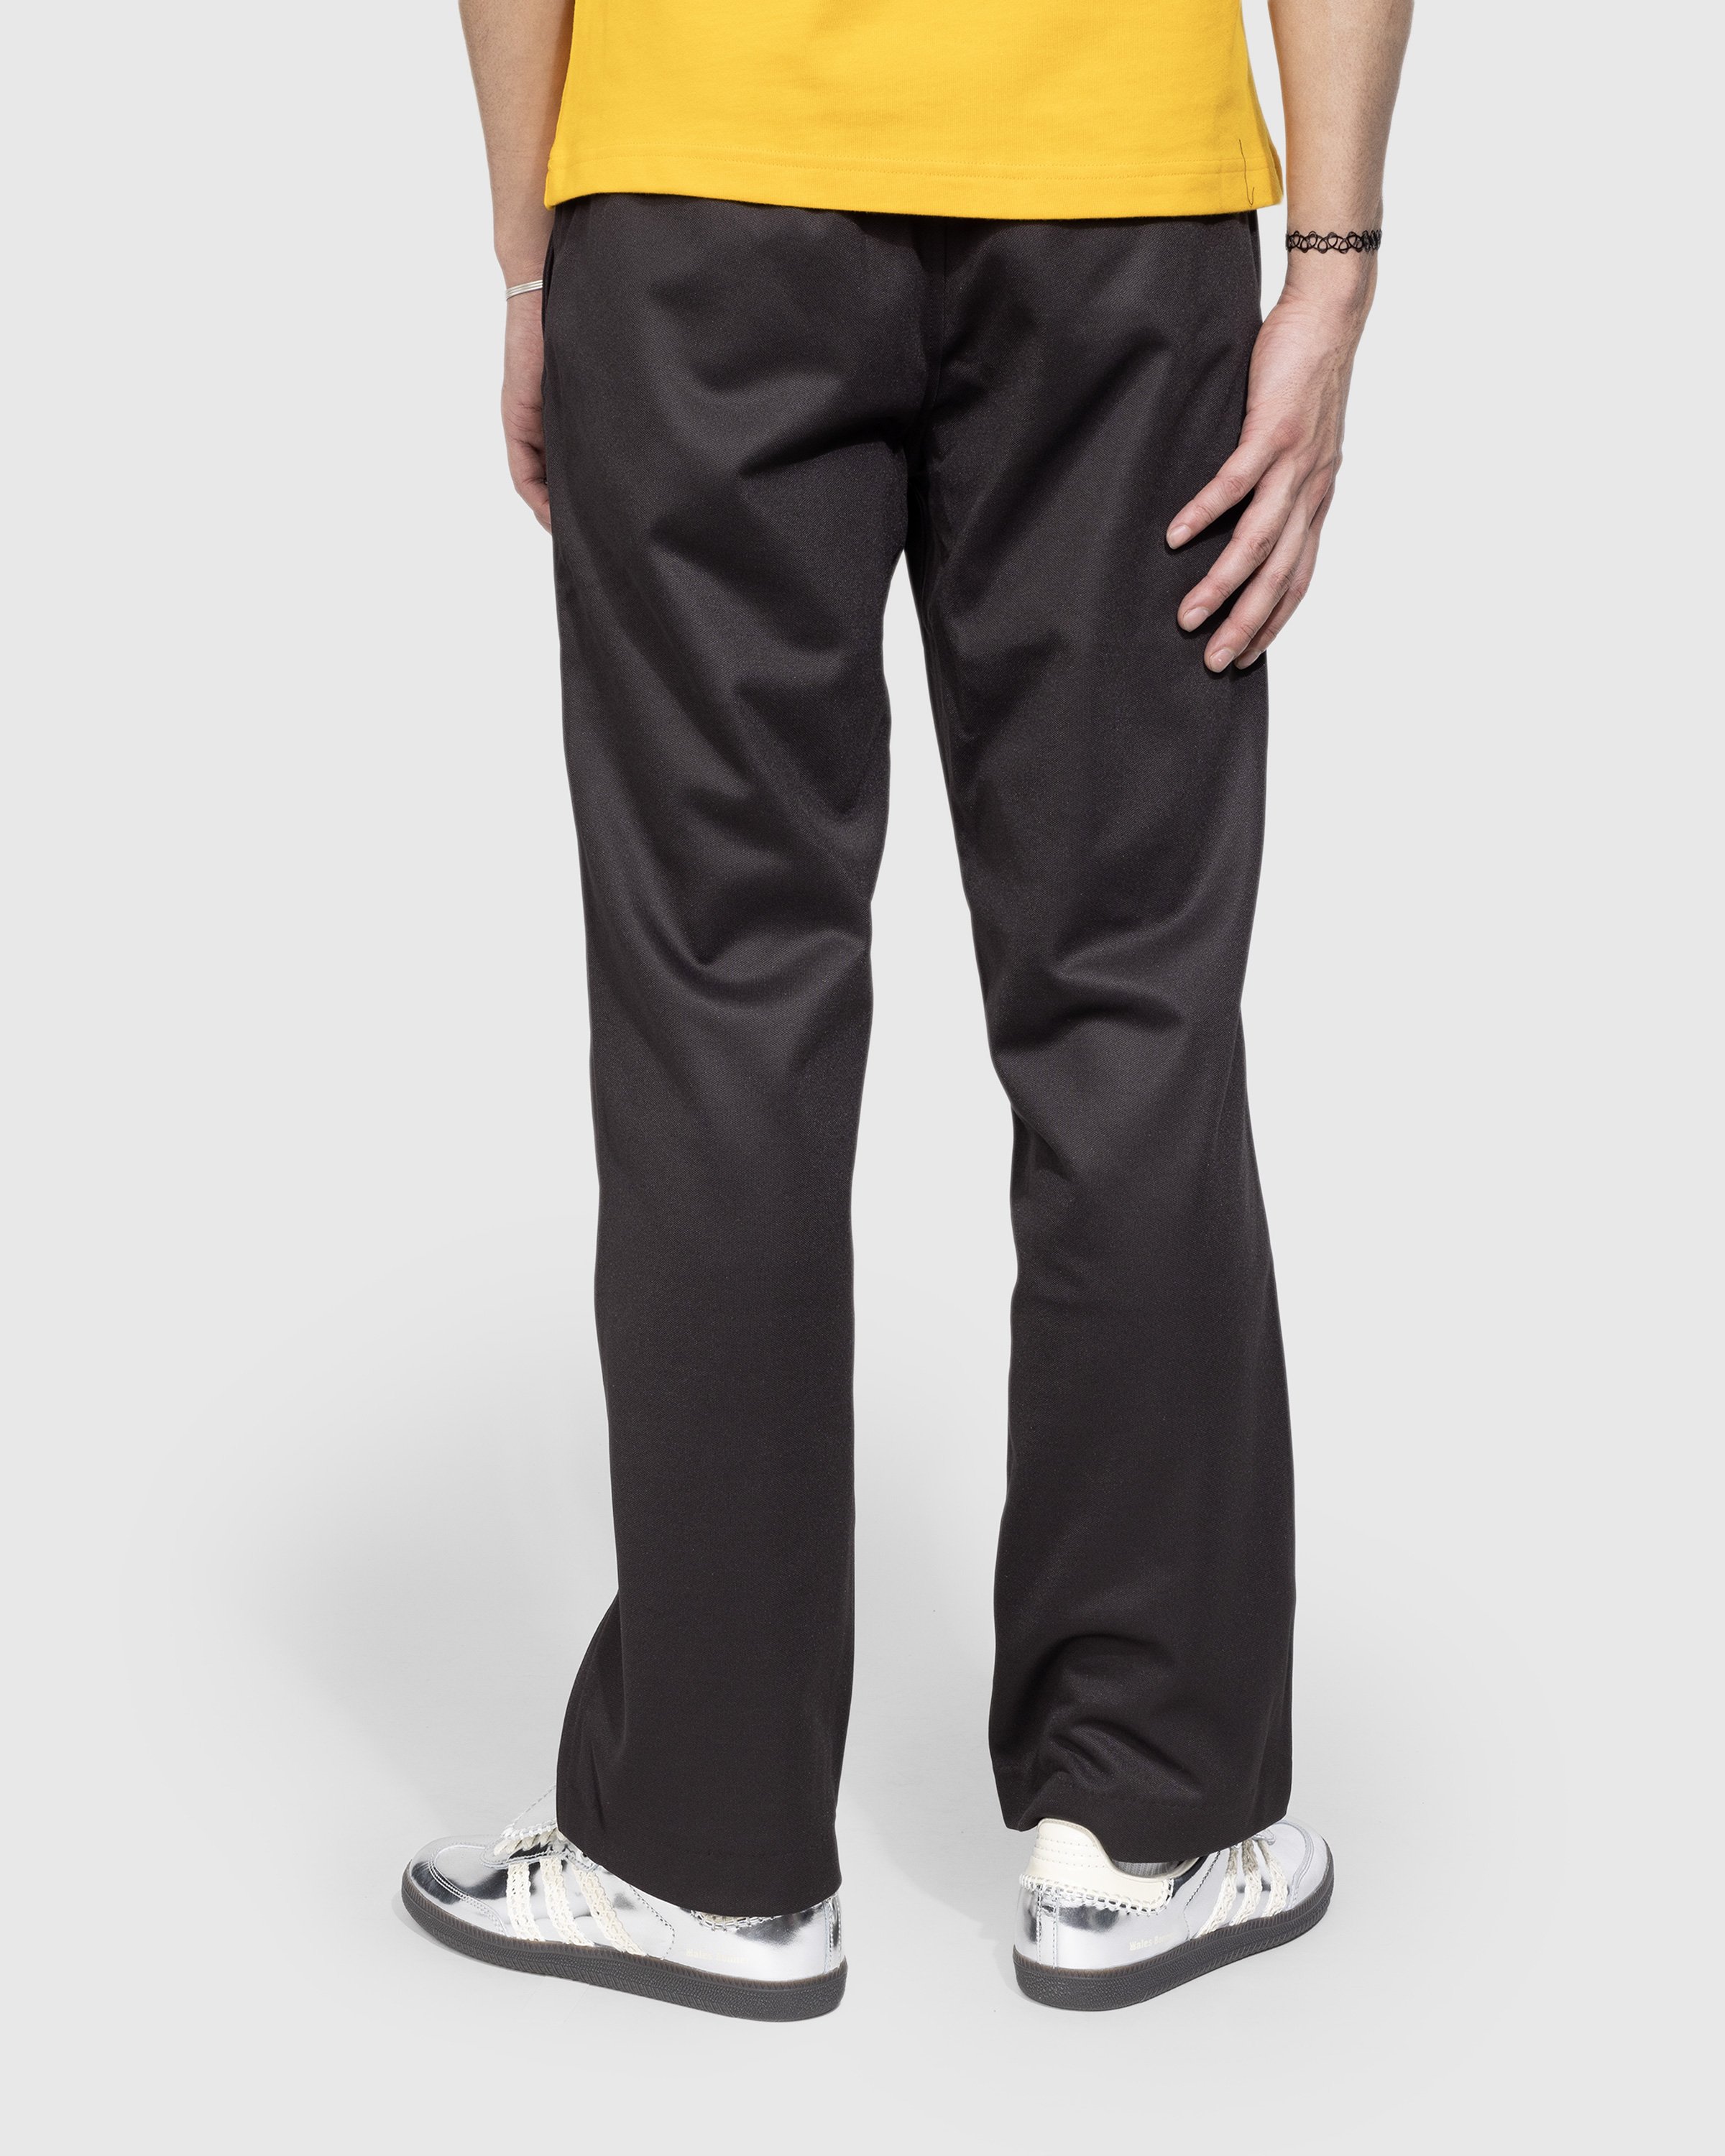 Adidas x Wales Bonner - Flared Trousers Night Brown - Clothing - Brown - Image 3